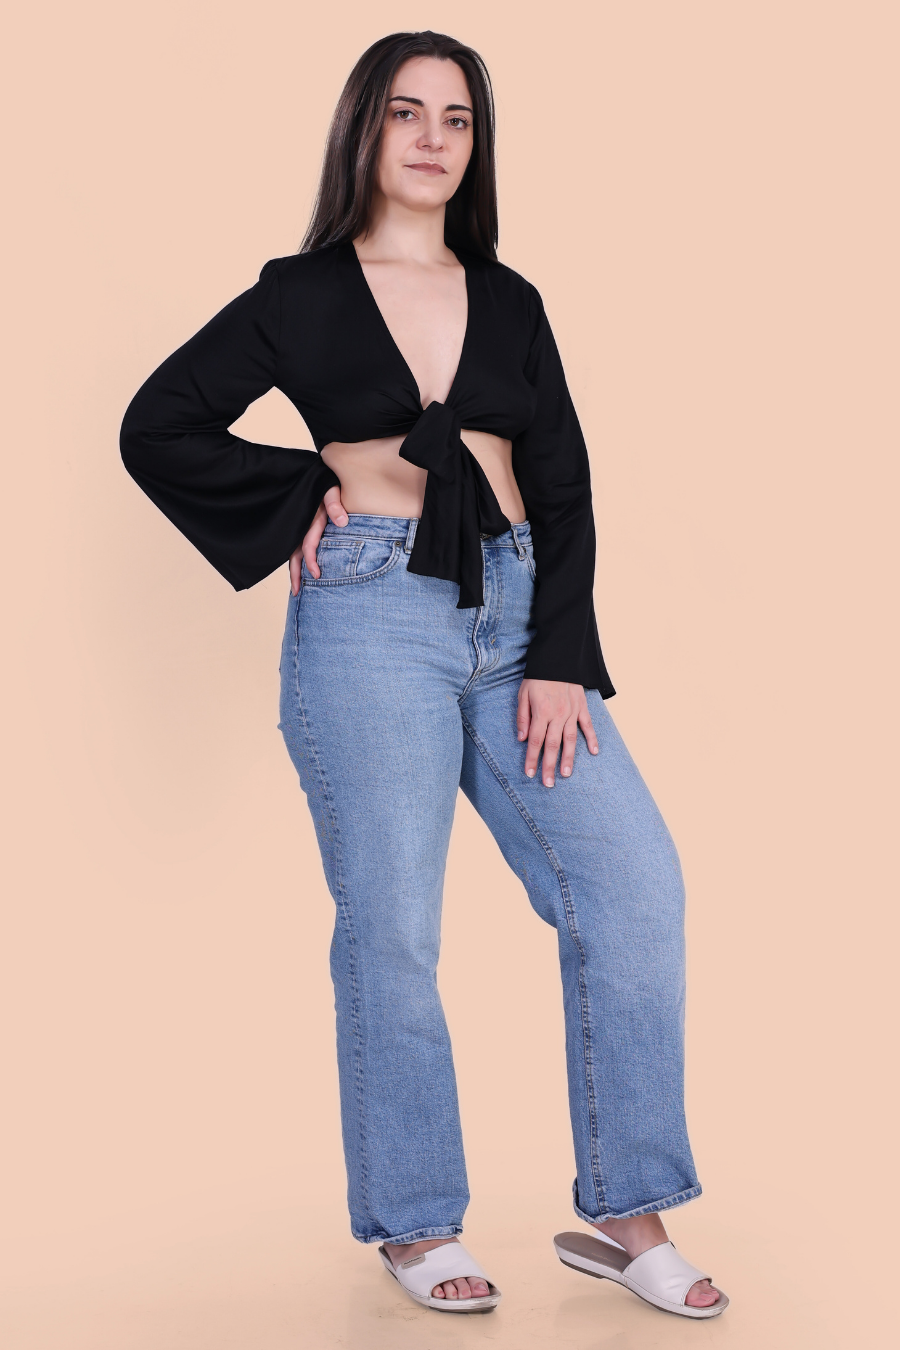 Full Length Image of a model wearing a tie front crop top sewed with winslet's patterns paired with blue jeans